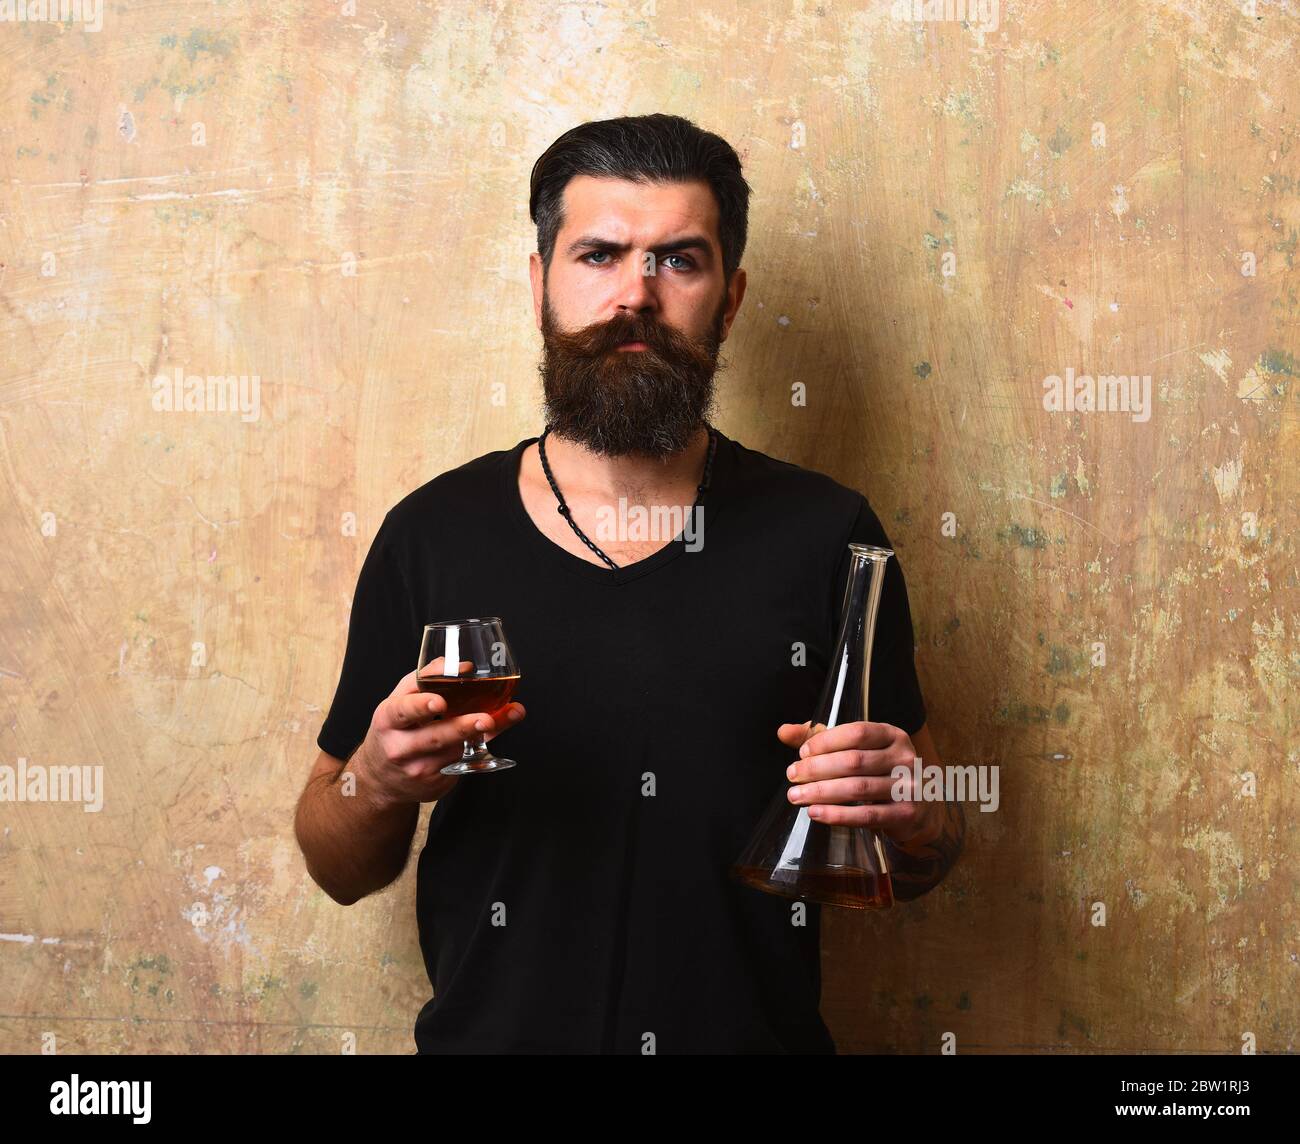 Man with beard and mustache holds alcoholic beverage on beige wall background. Service and catering concept. Guy with glass and bottle of cognac. Macho with serious face drinks brandy or whiskey. Stock Photo